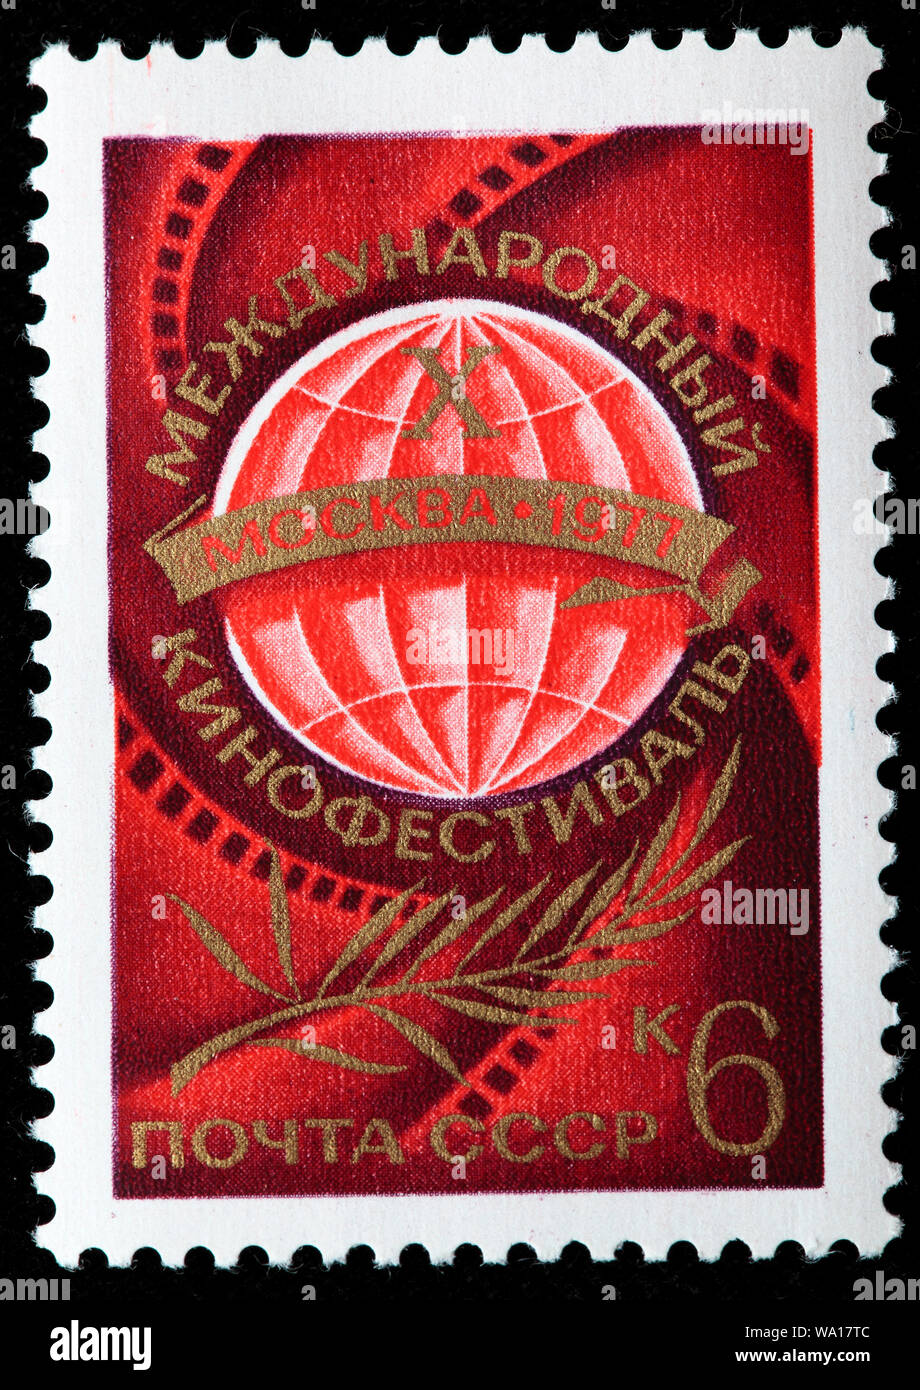 10th International cinema festival, Moscow, postage stamp, Russia, USSR, 1977 Stock Photo